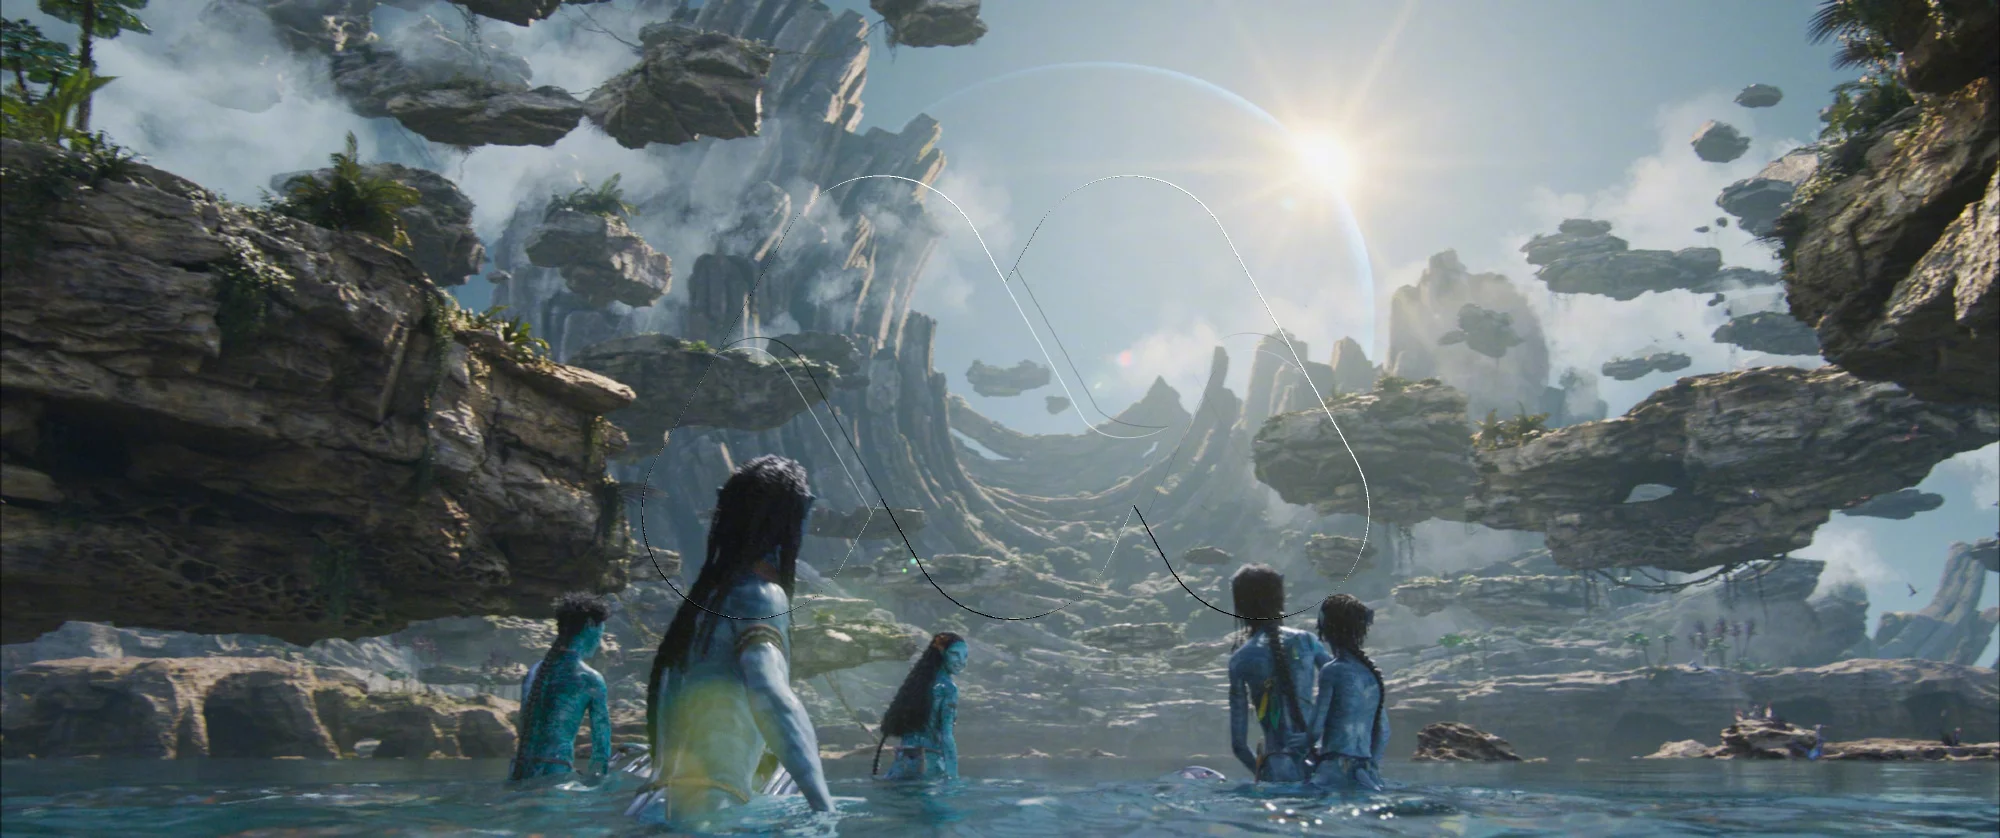 avatar-the-way-of-water-exposes-massive-new-stills-13